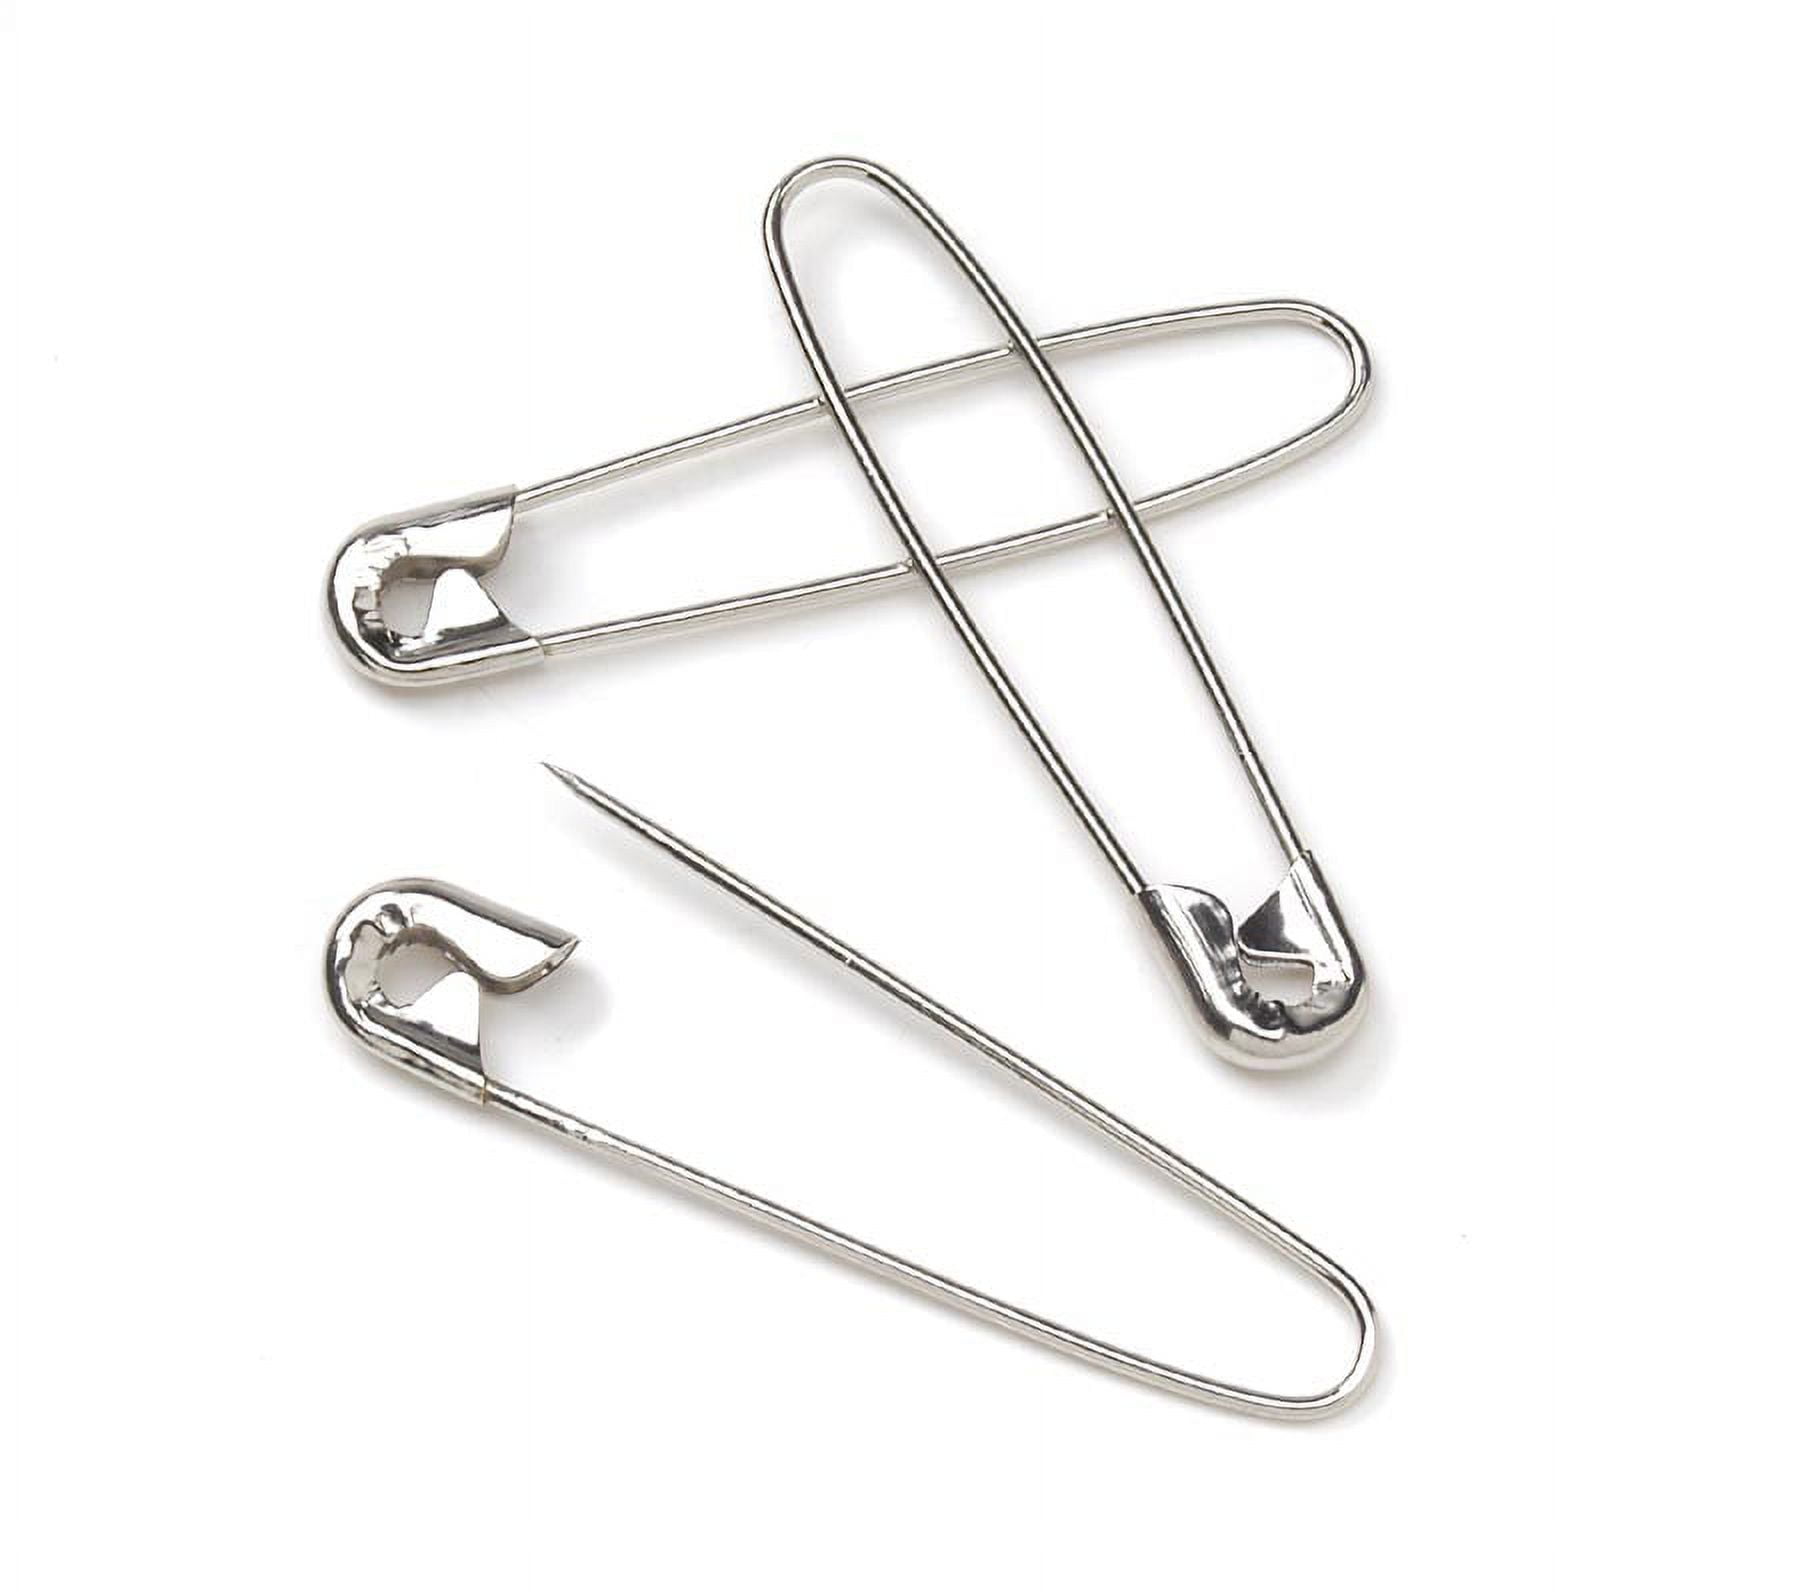 Coilless Pins - Wholesale Prices on Safety Pins by Strang Advance